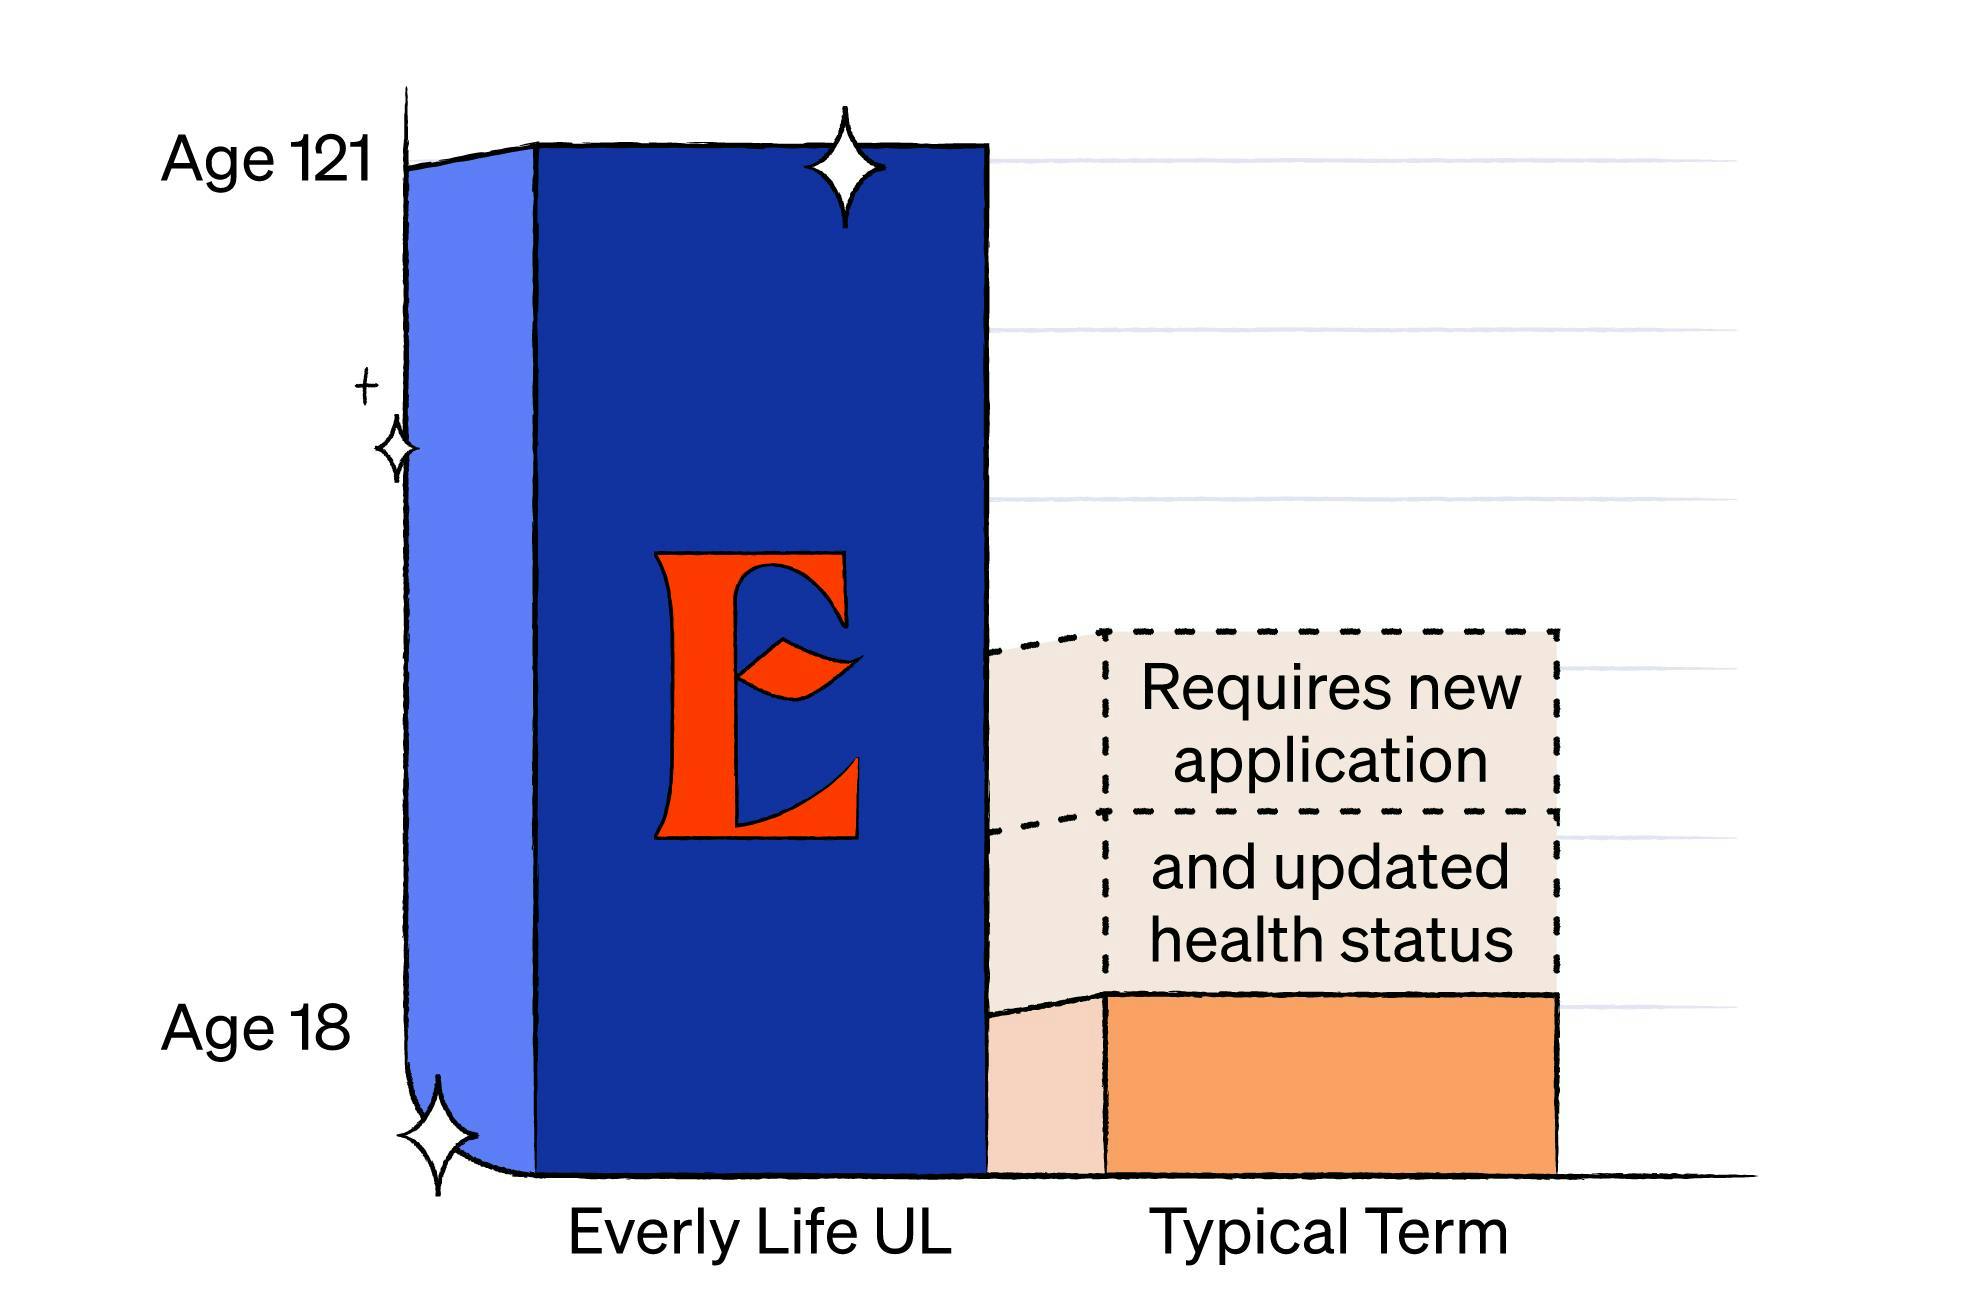 Graph comparing Everly's lifetime protection (up to age 121) verses to term protection periods which require new applications and updated health statuses.